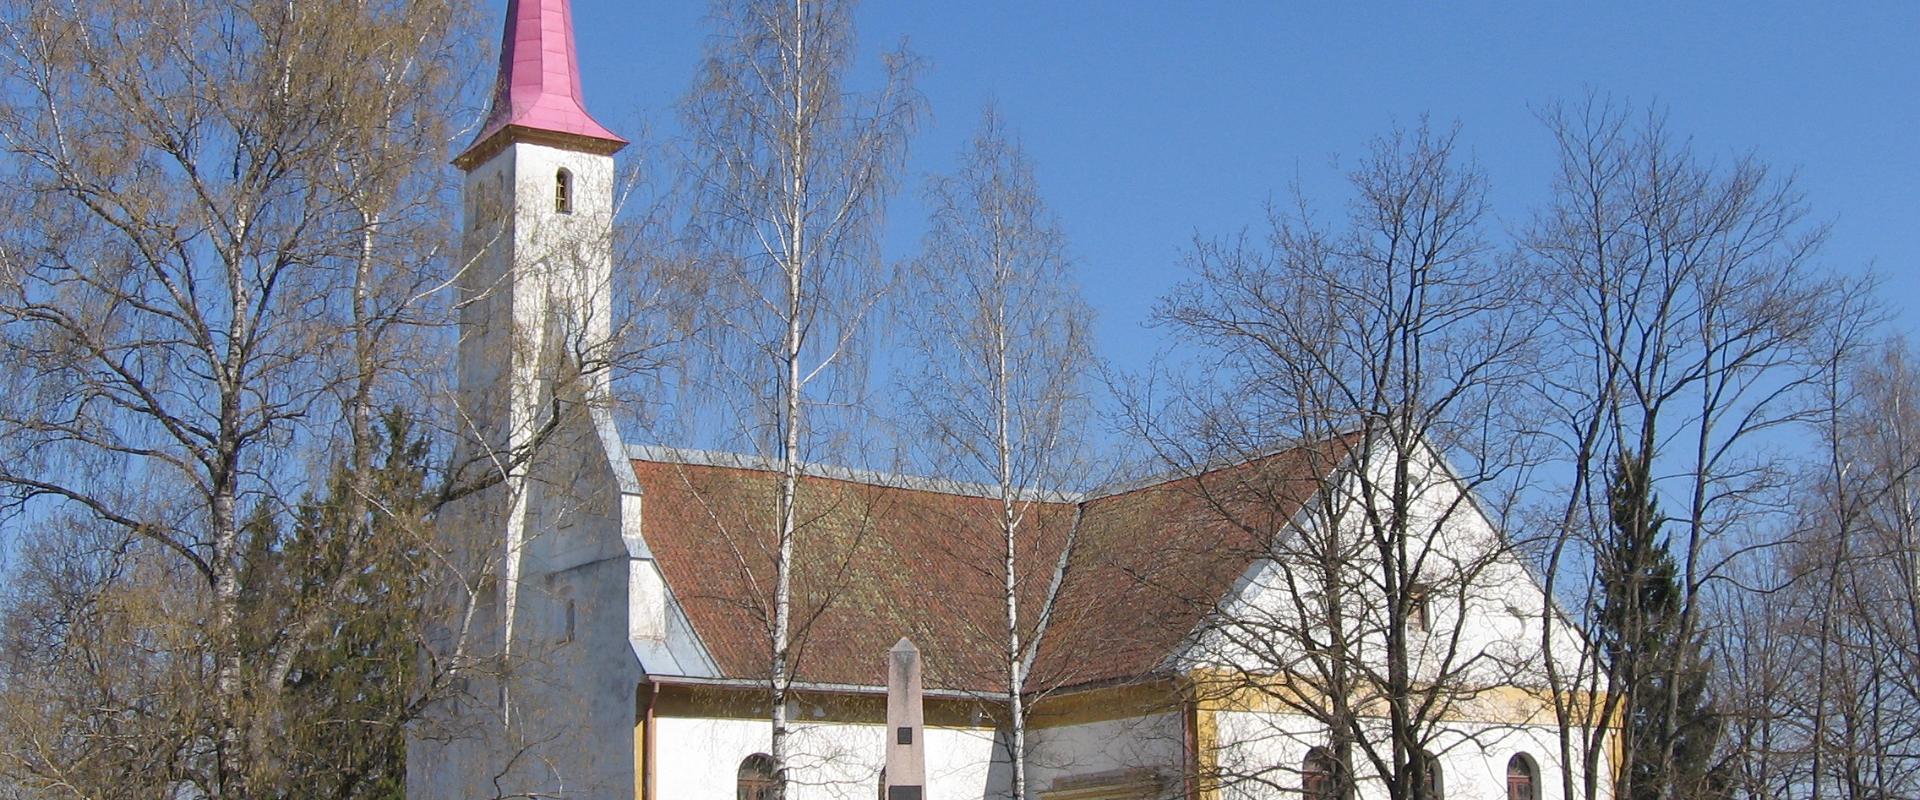 Lutheran Church of Blessed Virgin Mary in Põlva